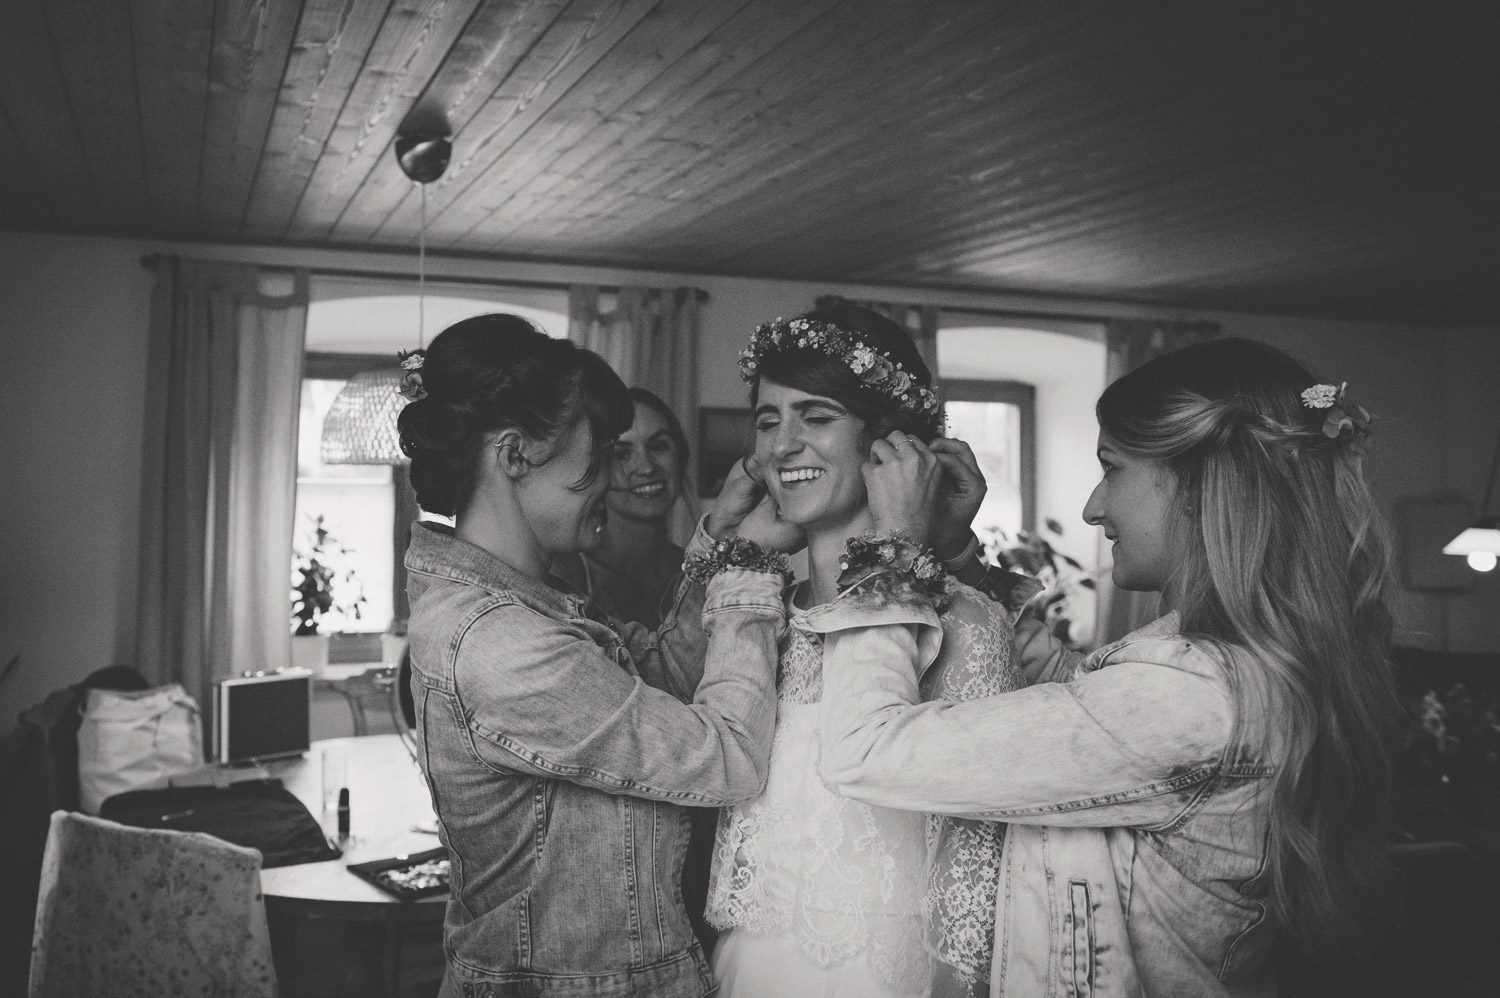 bride with flower crown getting ready on rustic farm with bridesmaids in denim jackets